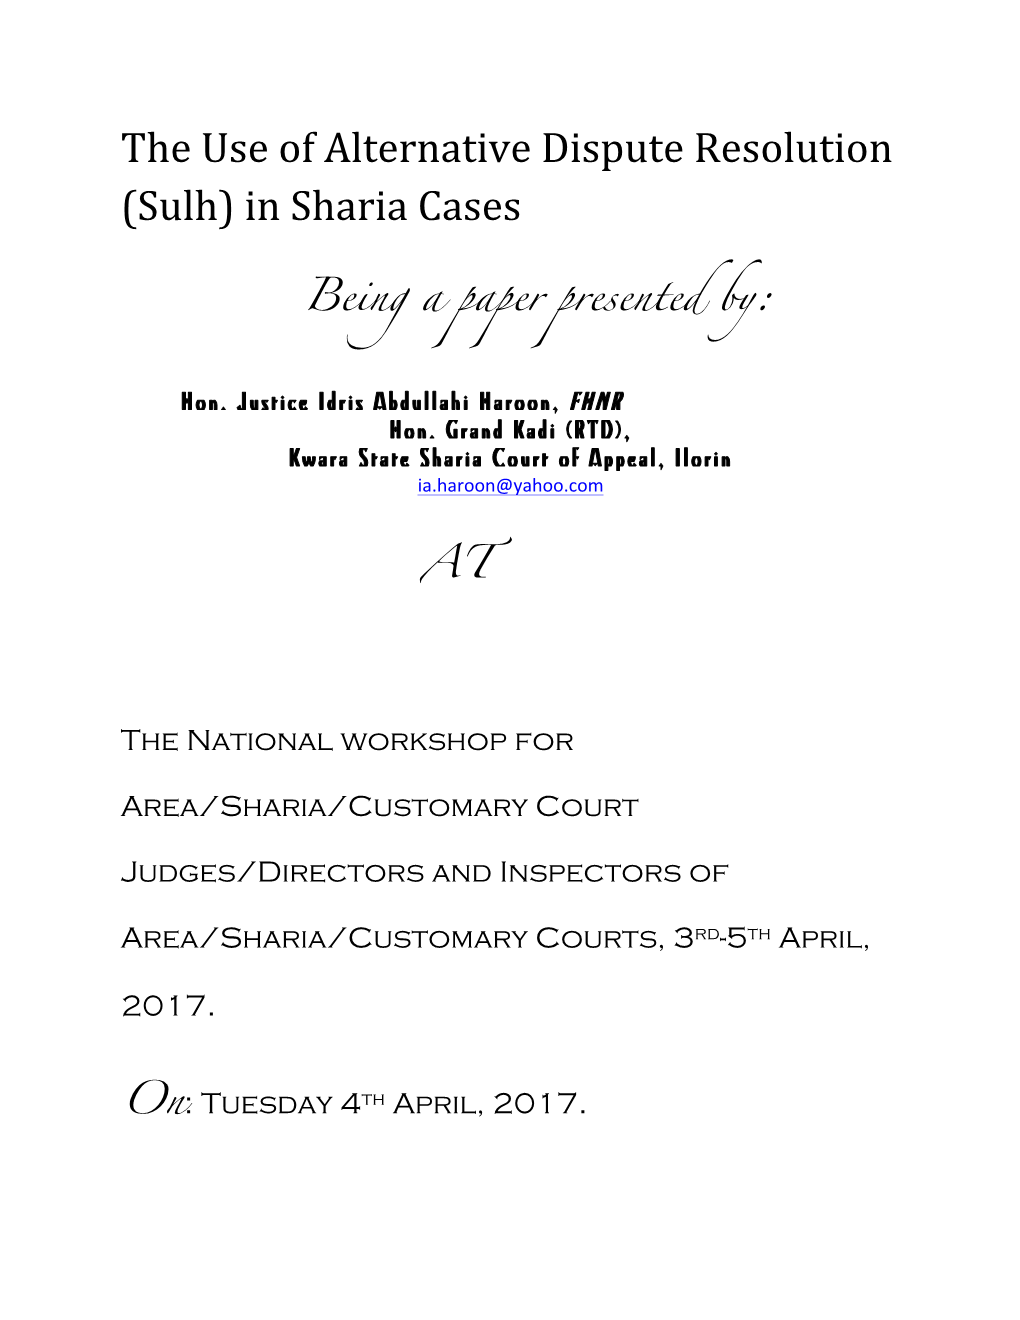 The Use of Alternative Dispute Resolution (Sulh) in Sharia Cases